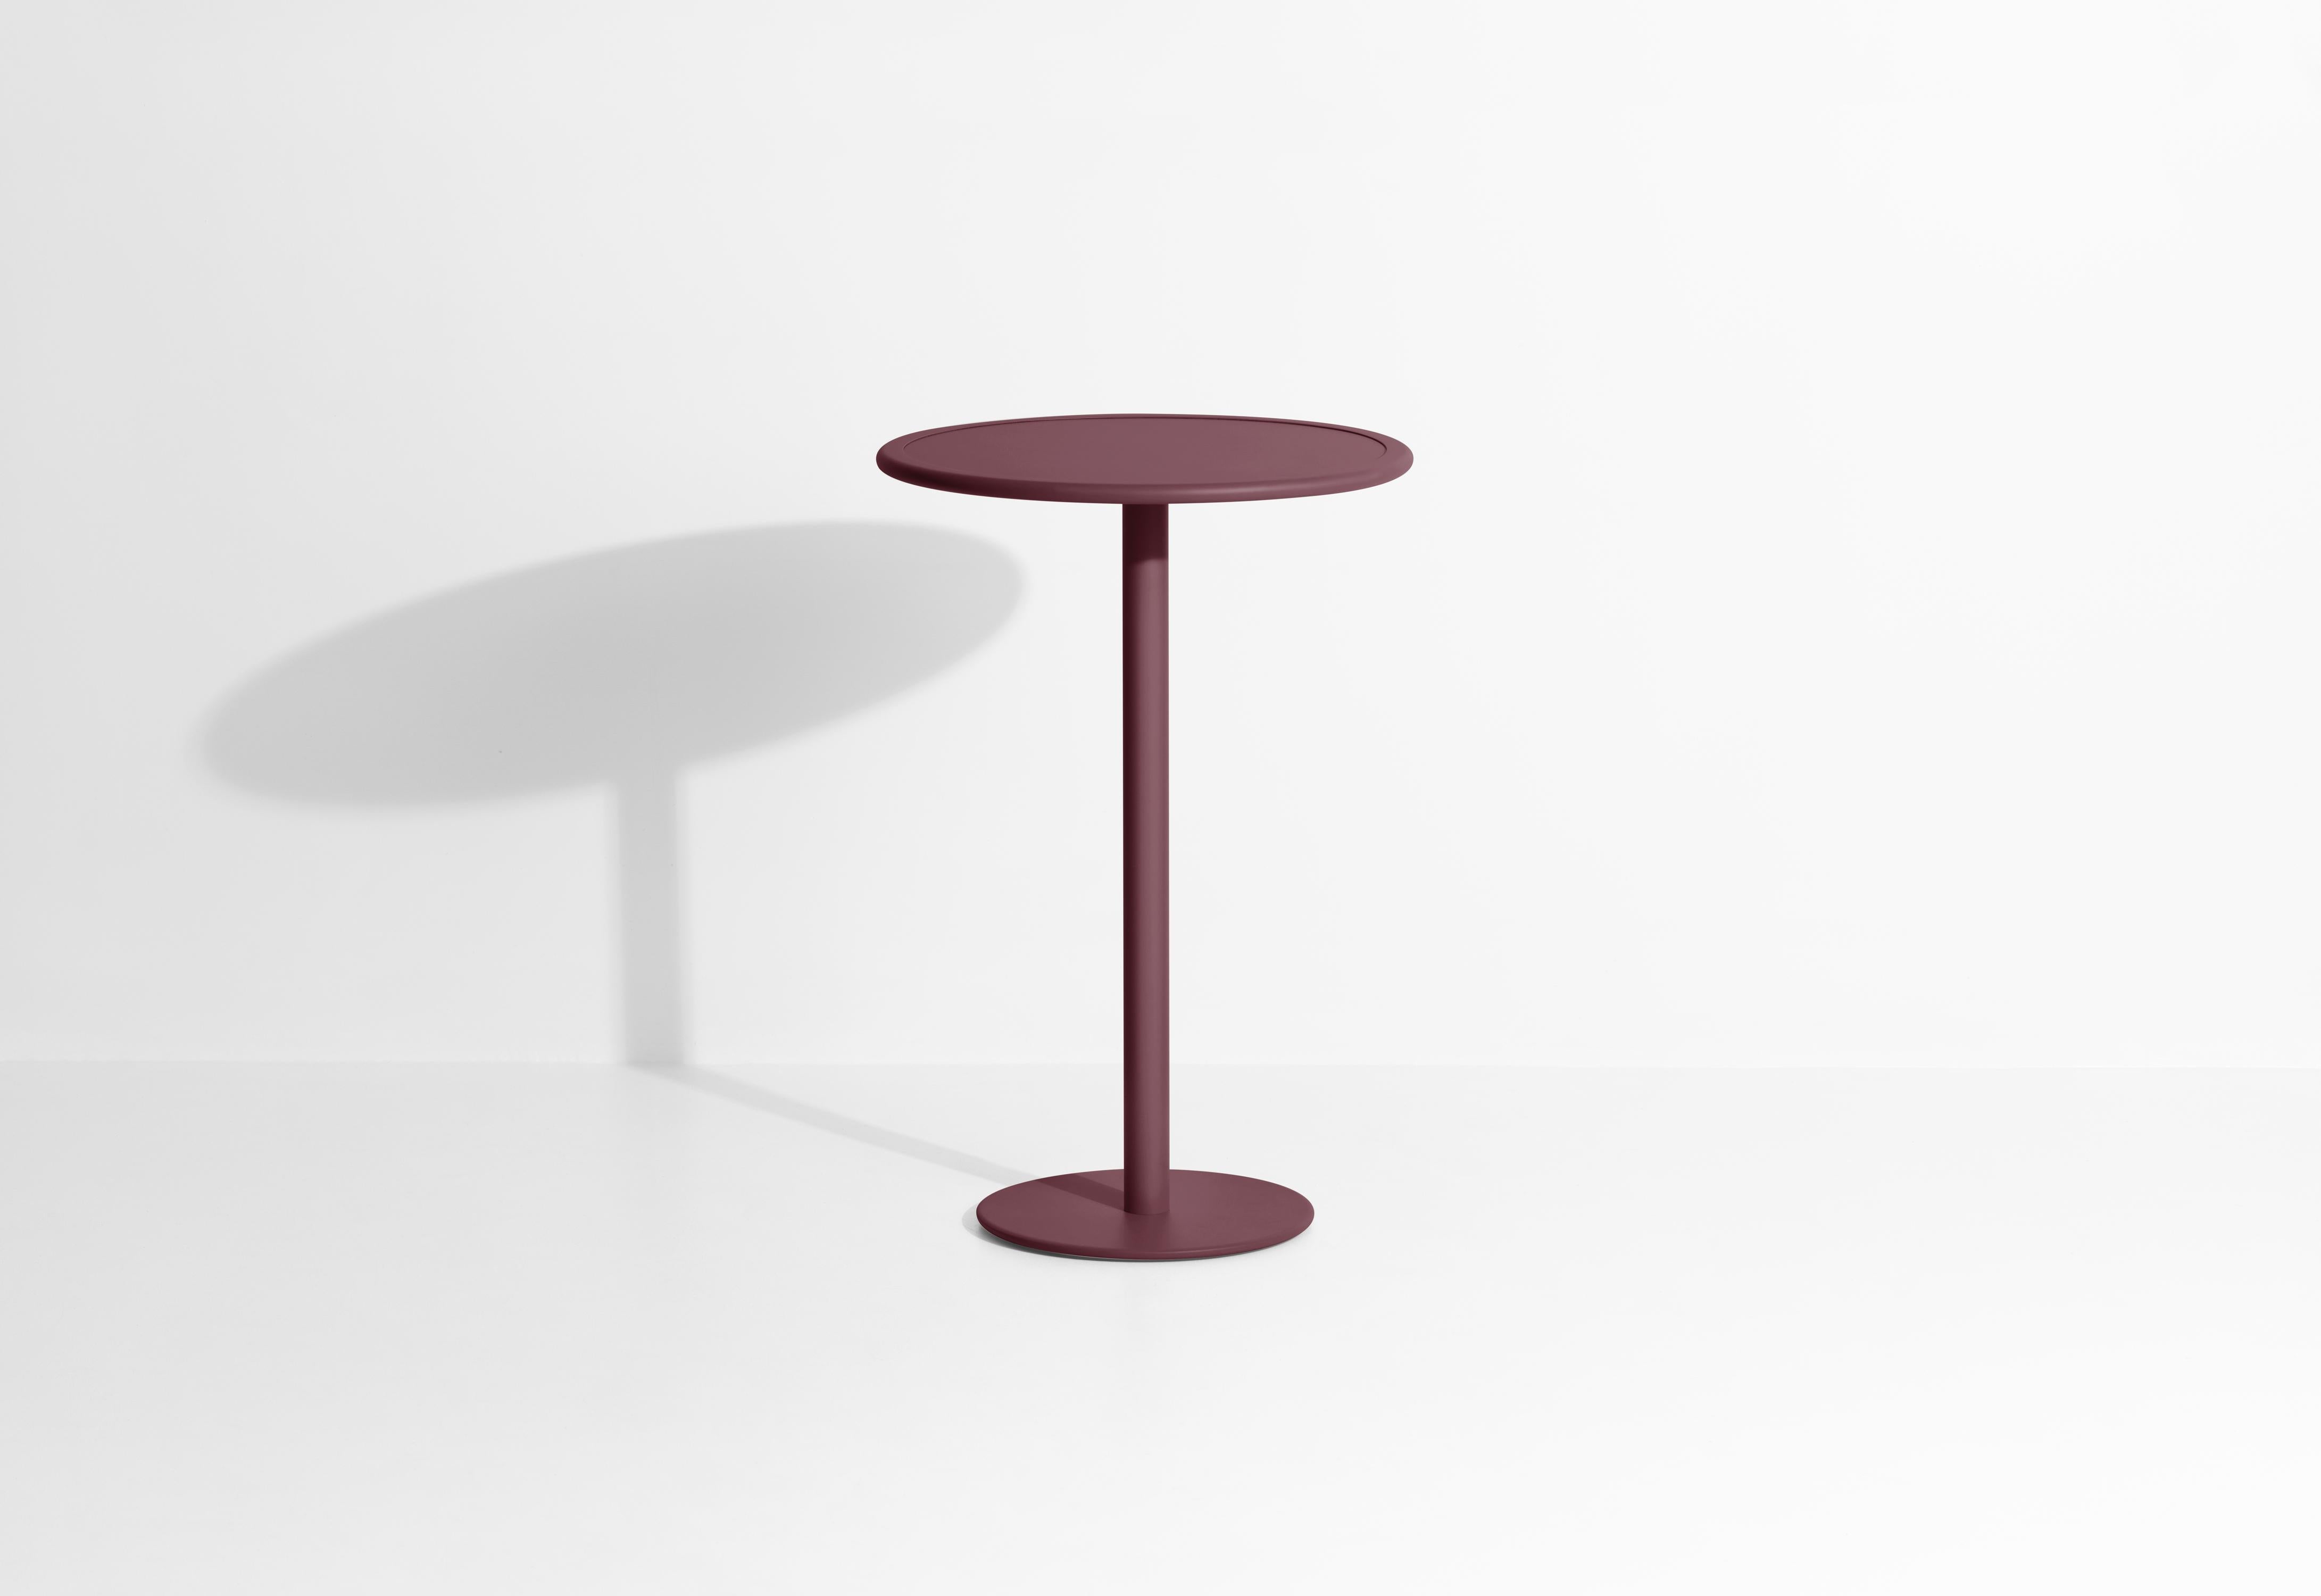 Petite Friture Week-End Round High Table in Burgundy Aluminium by Studio BrichetZiegler, 2017

The week-end collection is a full range of outdoor furniture, in aluminium grained epoxy paint, matt finish, that includes 18 functions and 8 colours